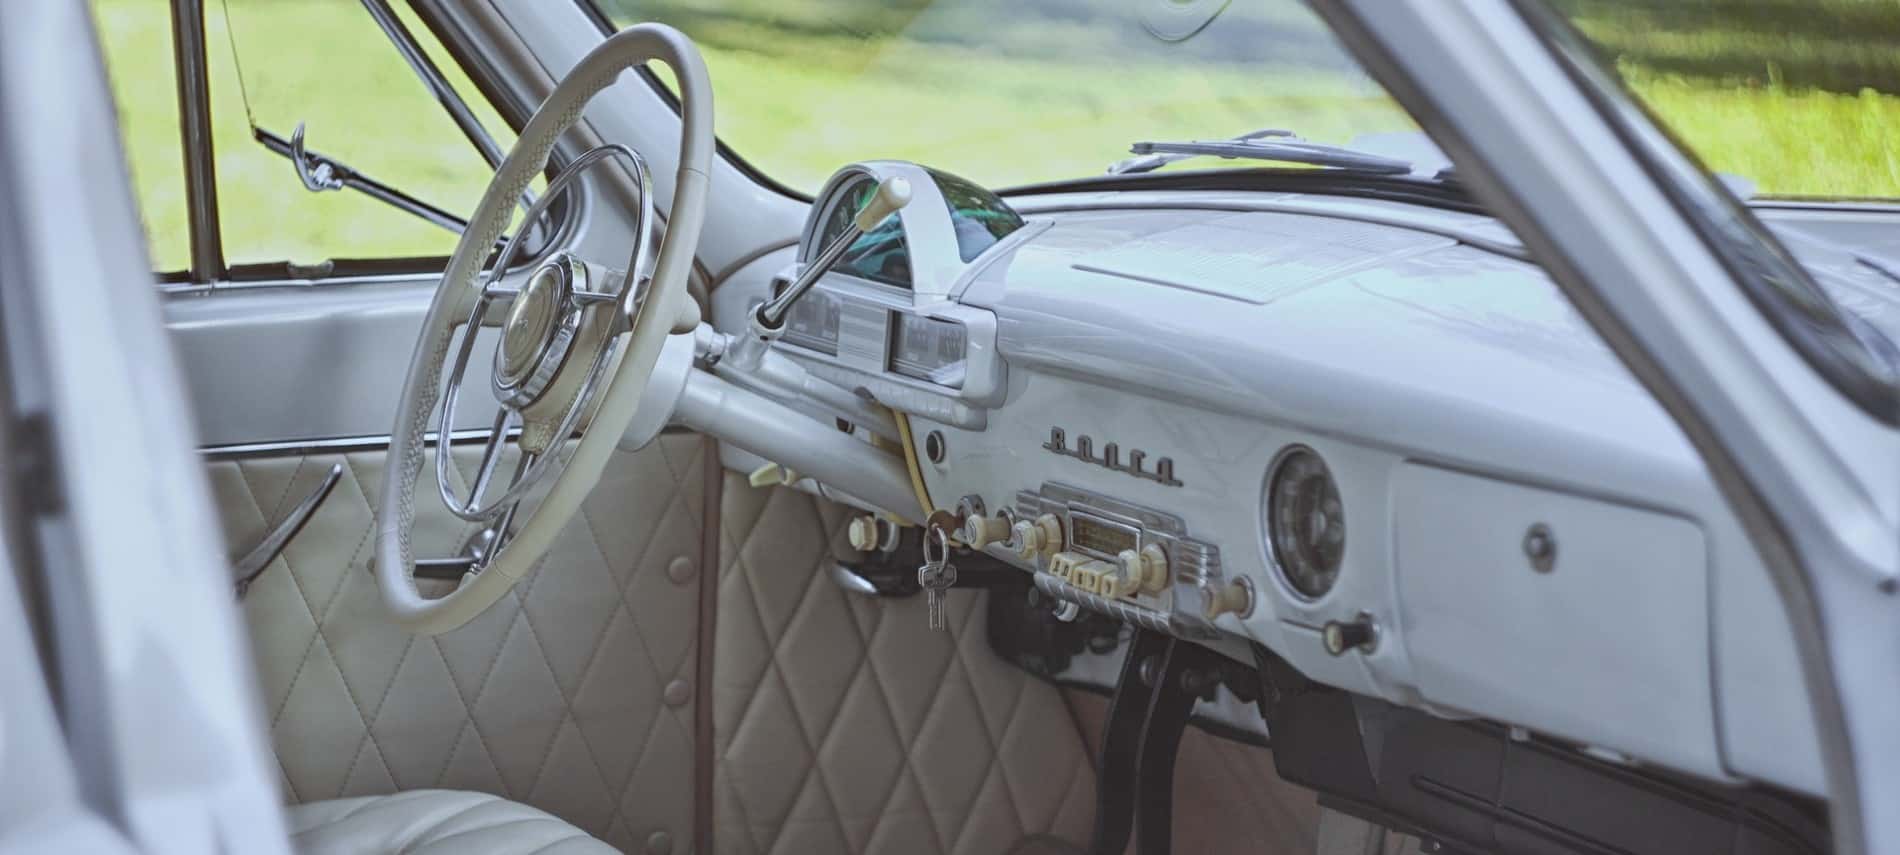 Inside of a classic vintage car showing a white interior in mint condition